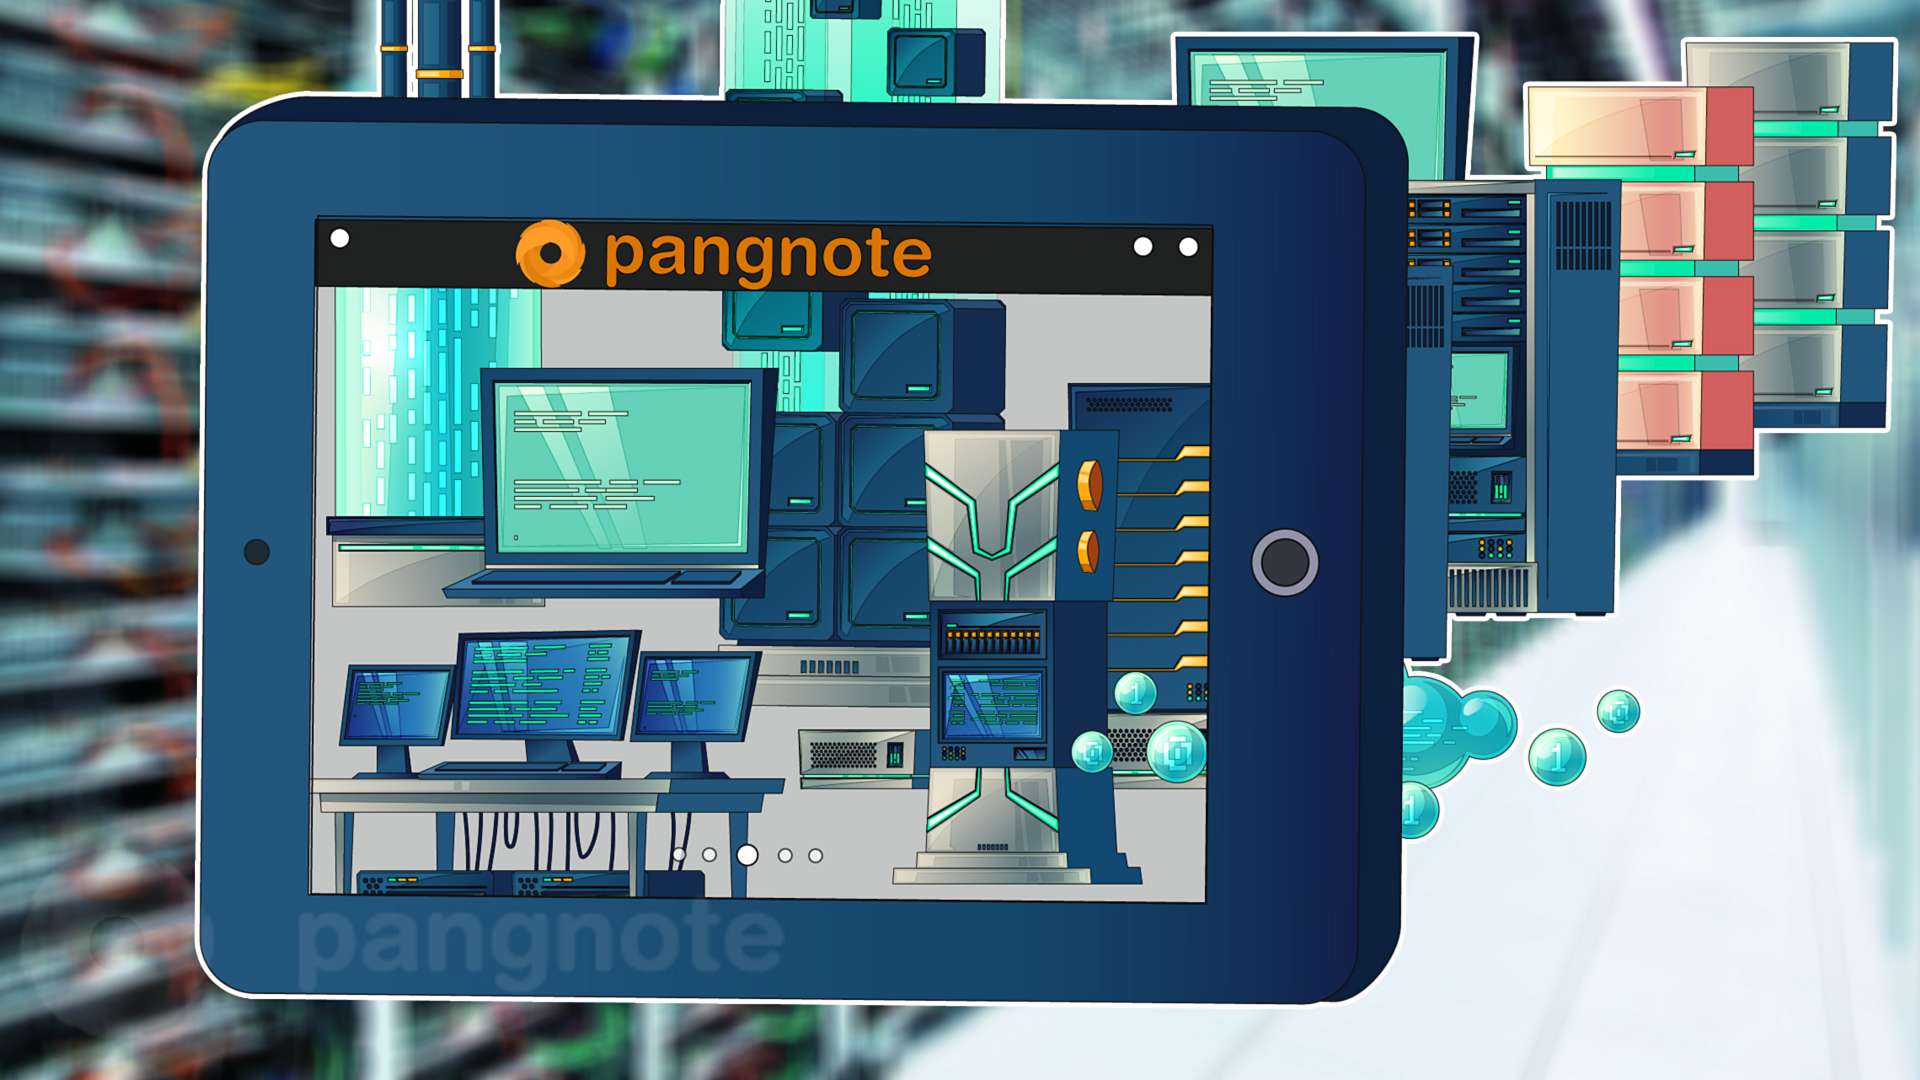 Why Pangnote a roaring Hosting services exchange and does not look like a forum